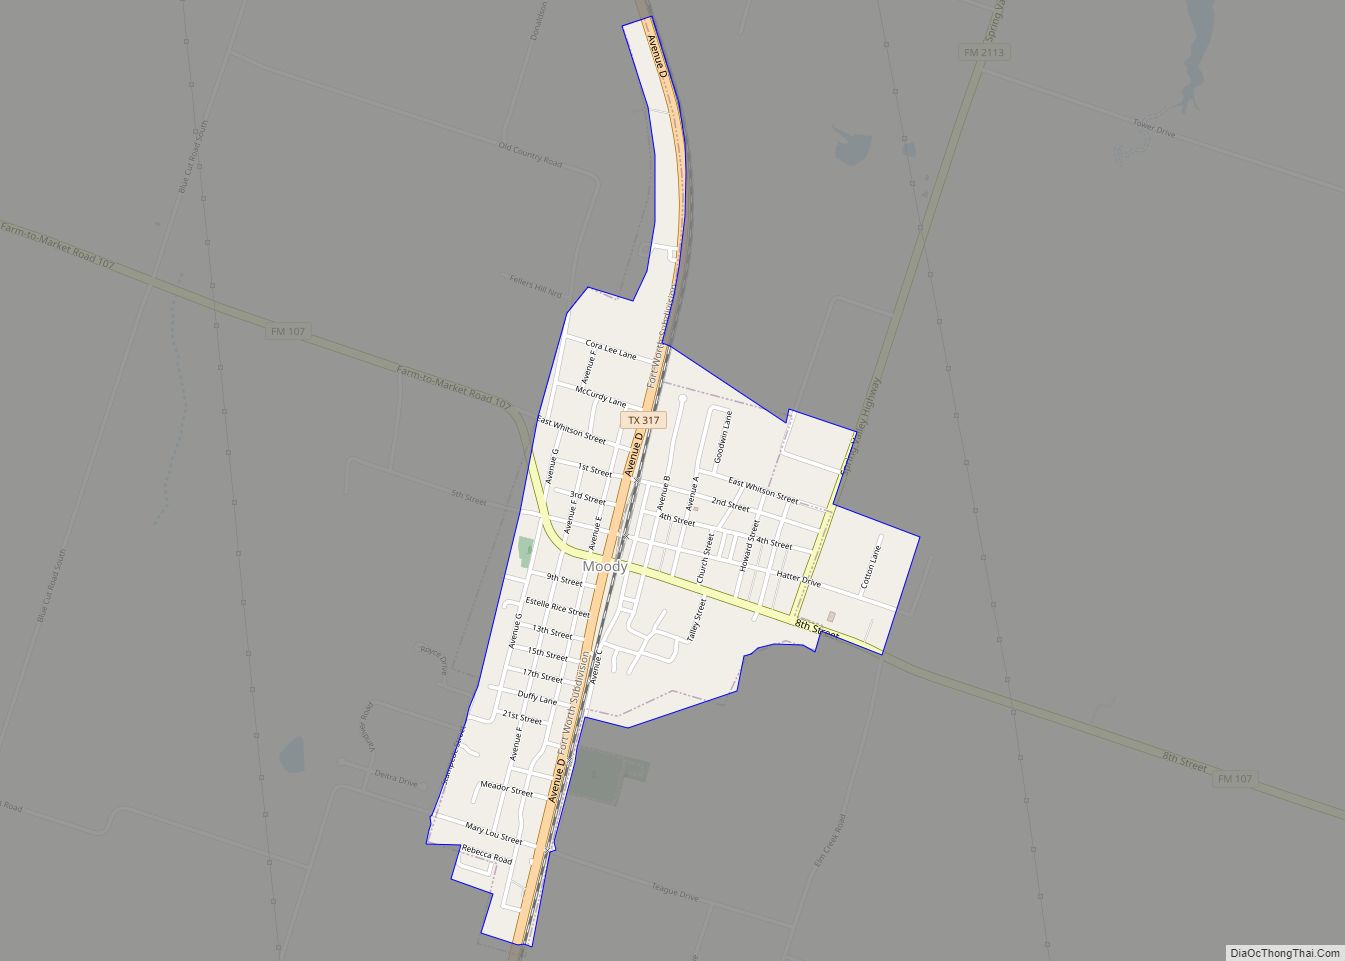 Map of Moody city, Texas